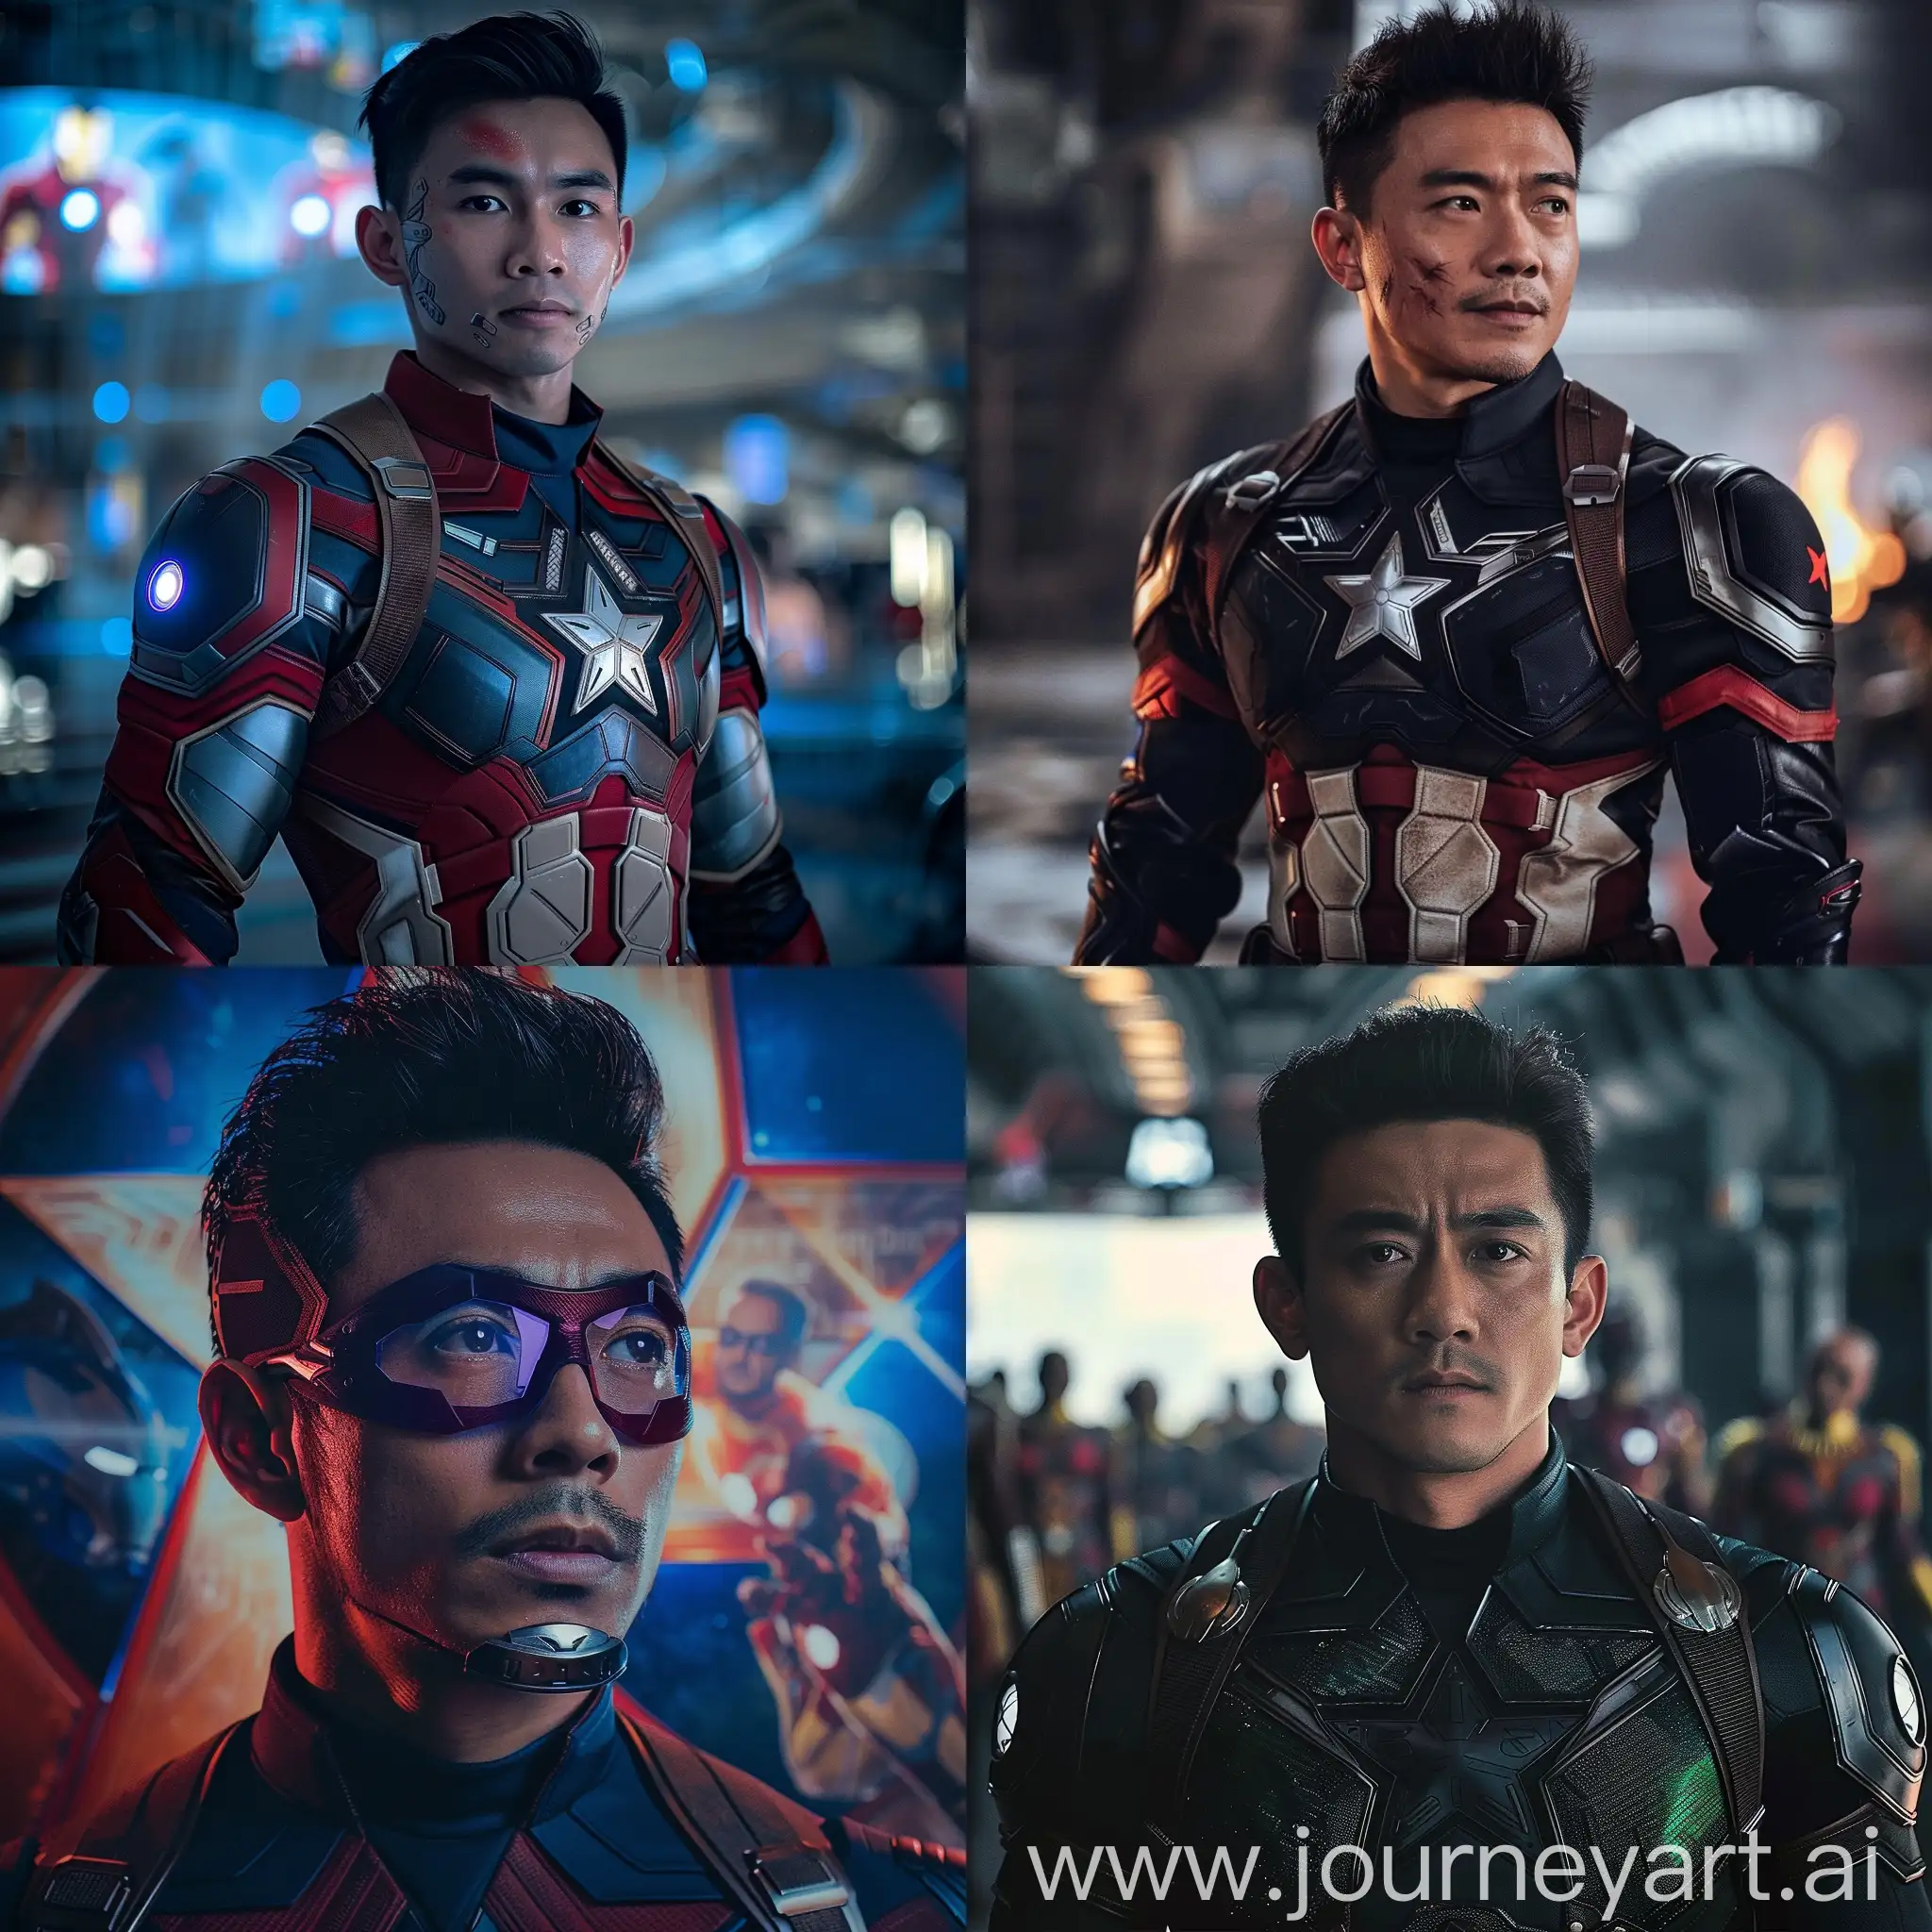 Real photo Si pitung become member of avengers in 2024